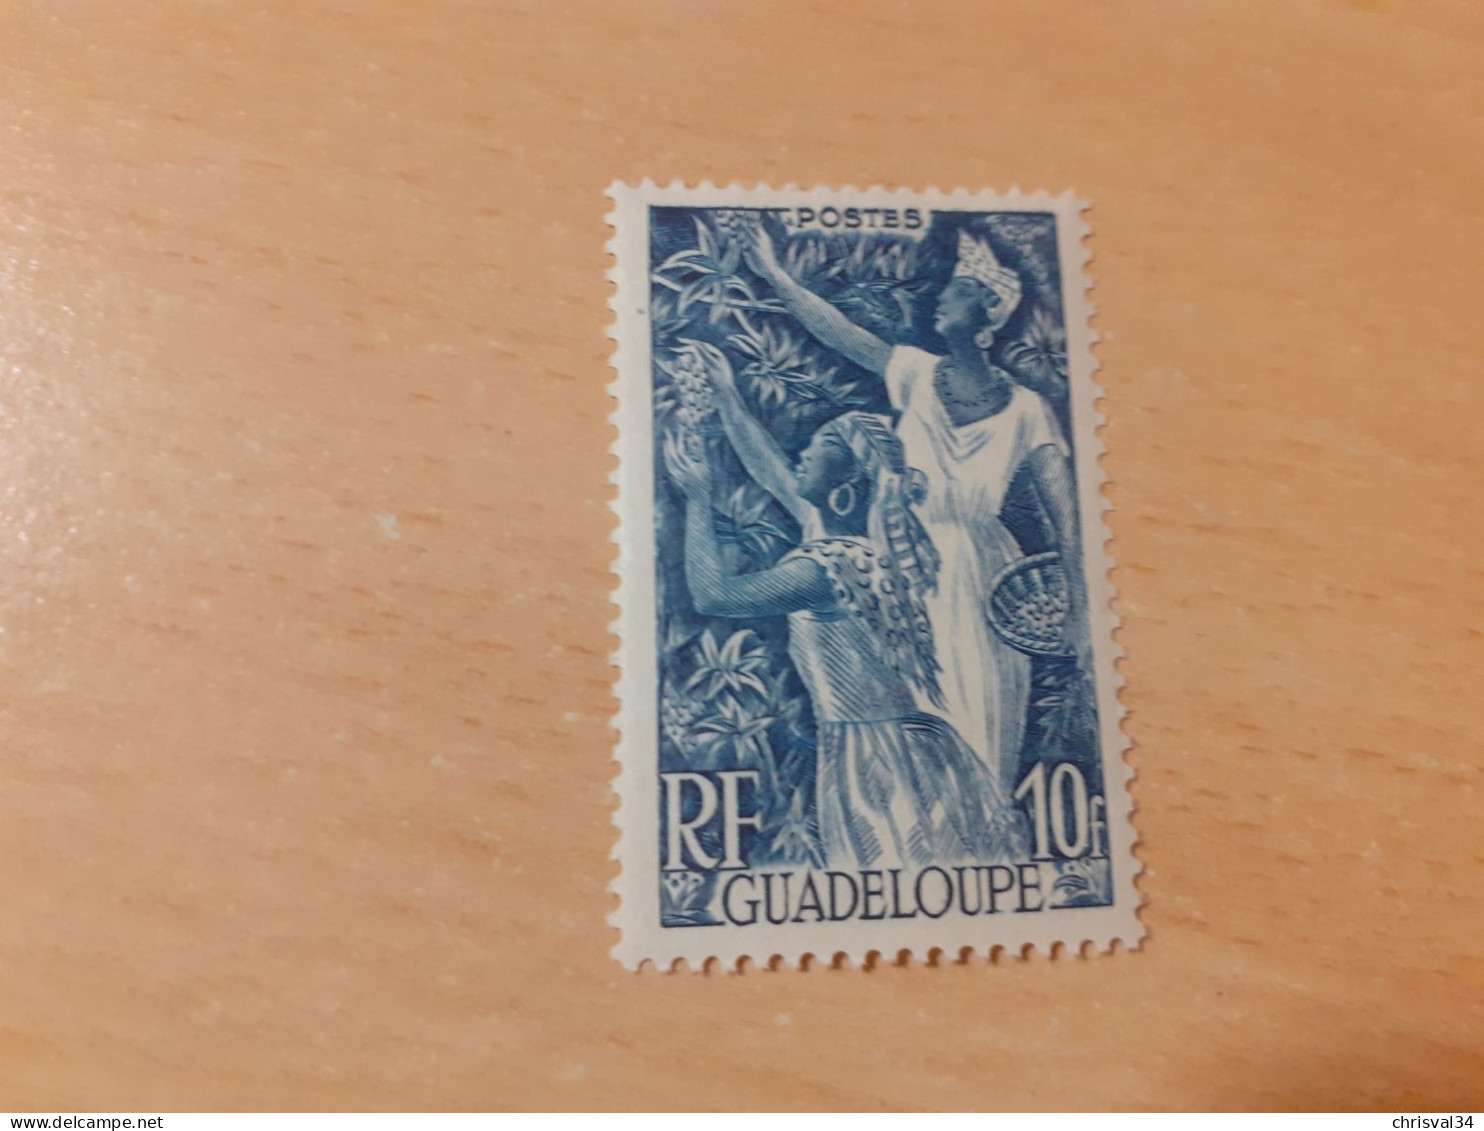 TIMBRE   GUADELOUPE       N  209    COTE  1,25   EUROS  NEUF  TRACE  CHARNIERE - Ungebraucht